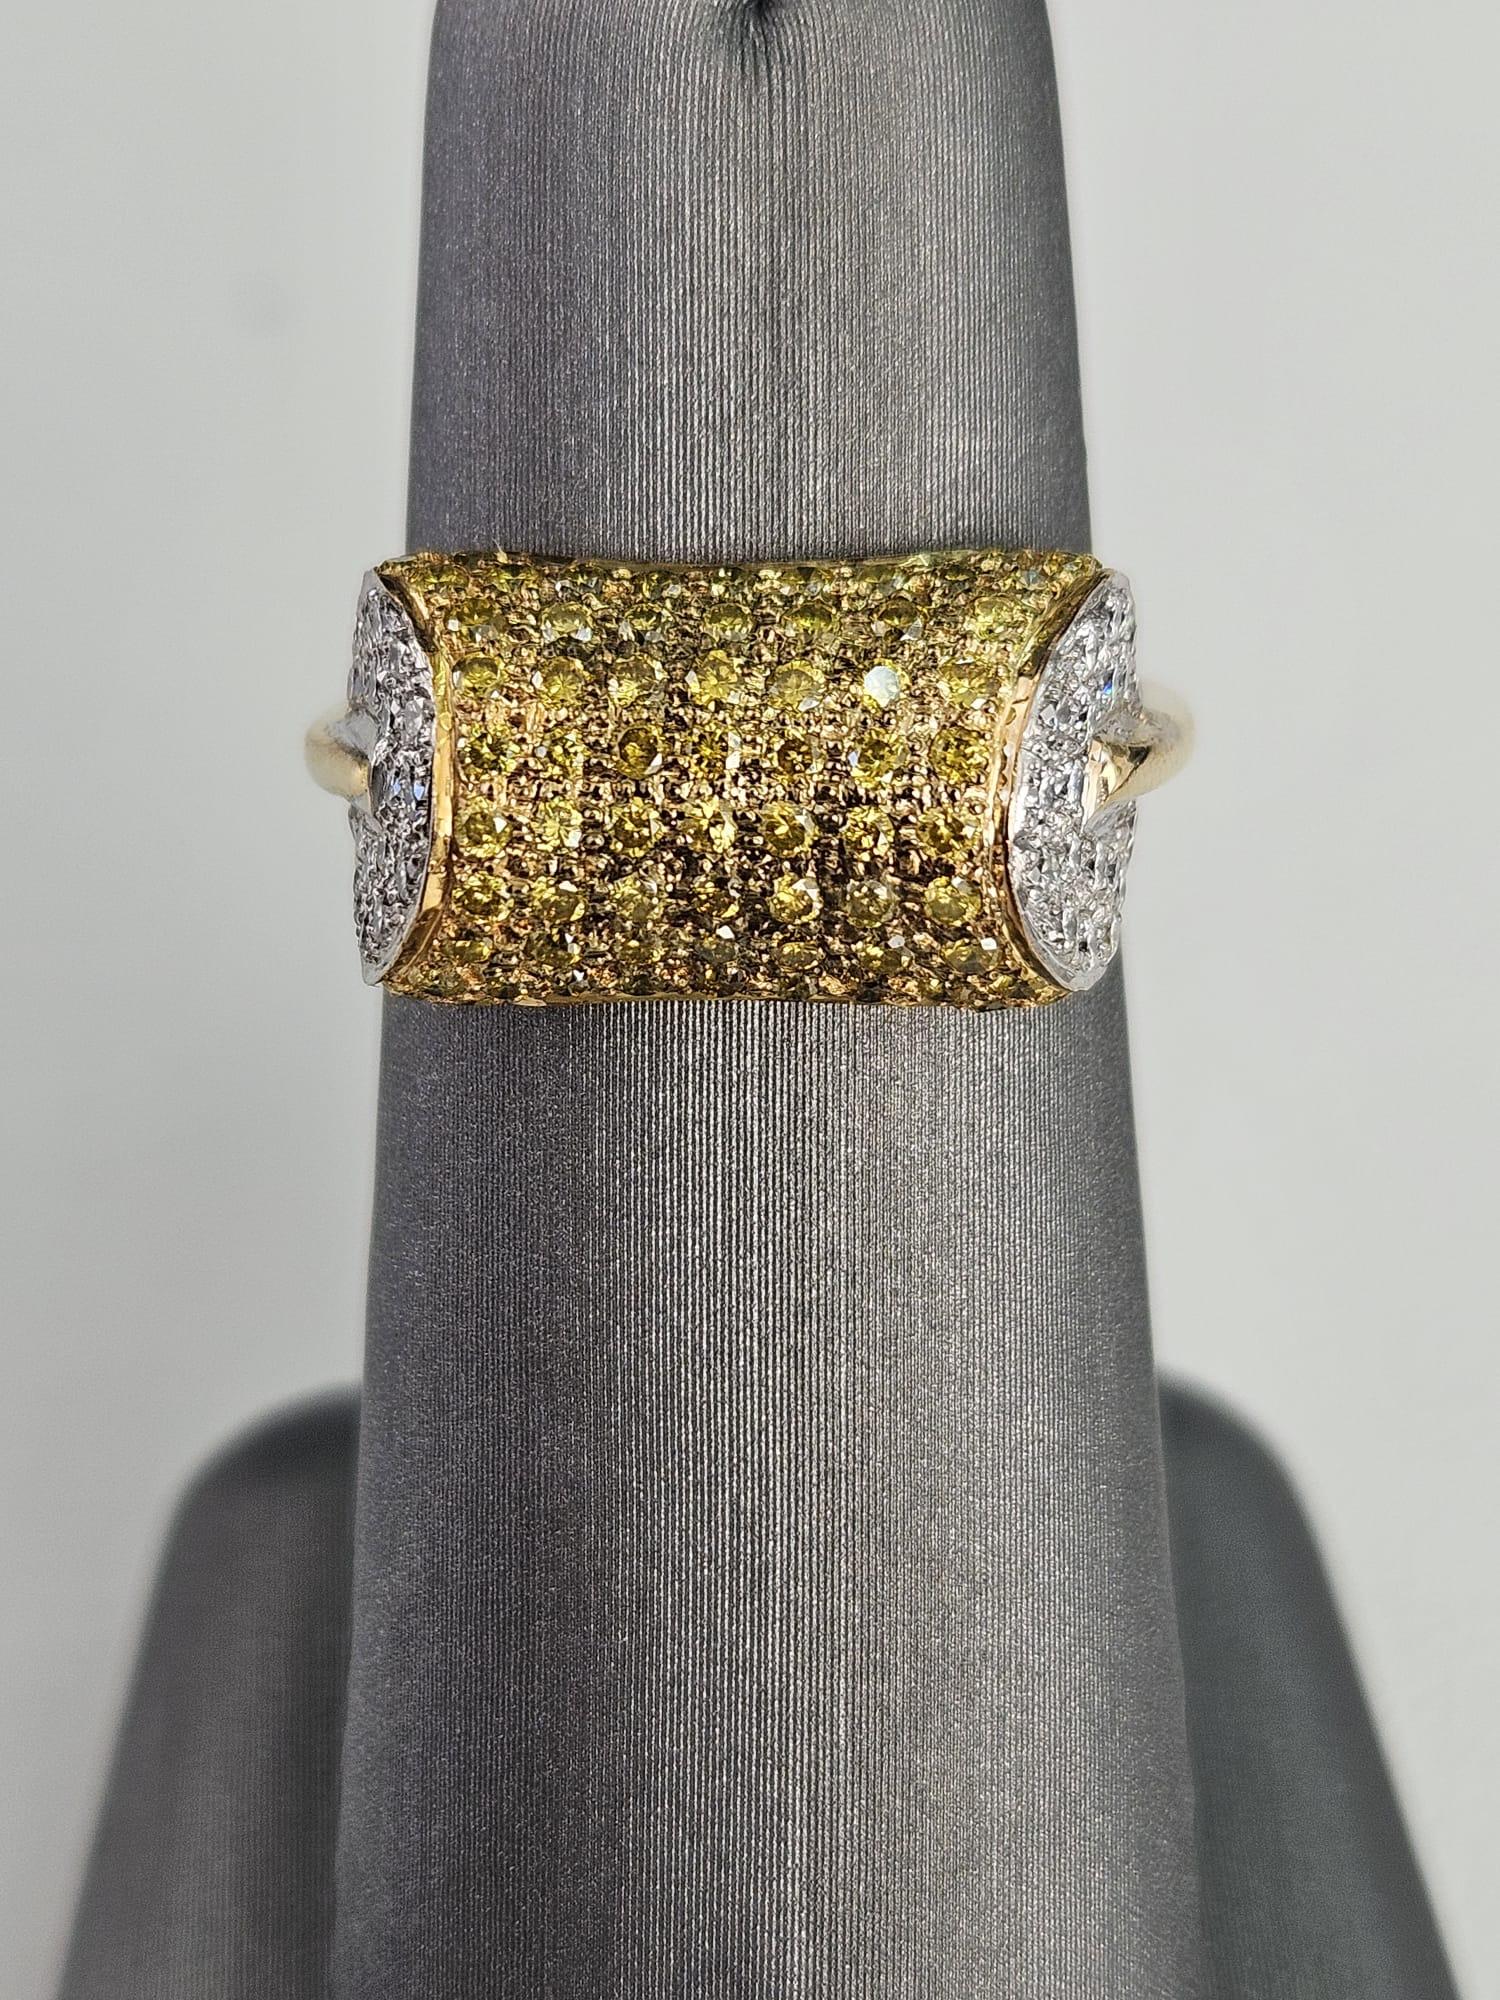 
Introducing a truly unique and enchanting ring that defies conventional design norms. This exceptional piece features a horizontally oriented cylindrical formation, extending halfway across the ring, making a bold statement of contemporary